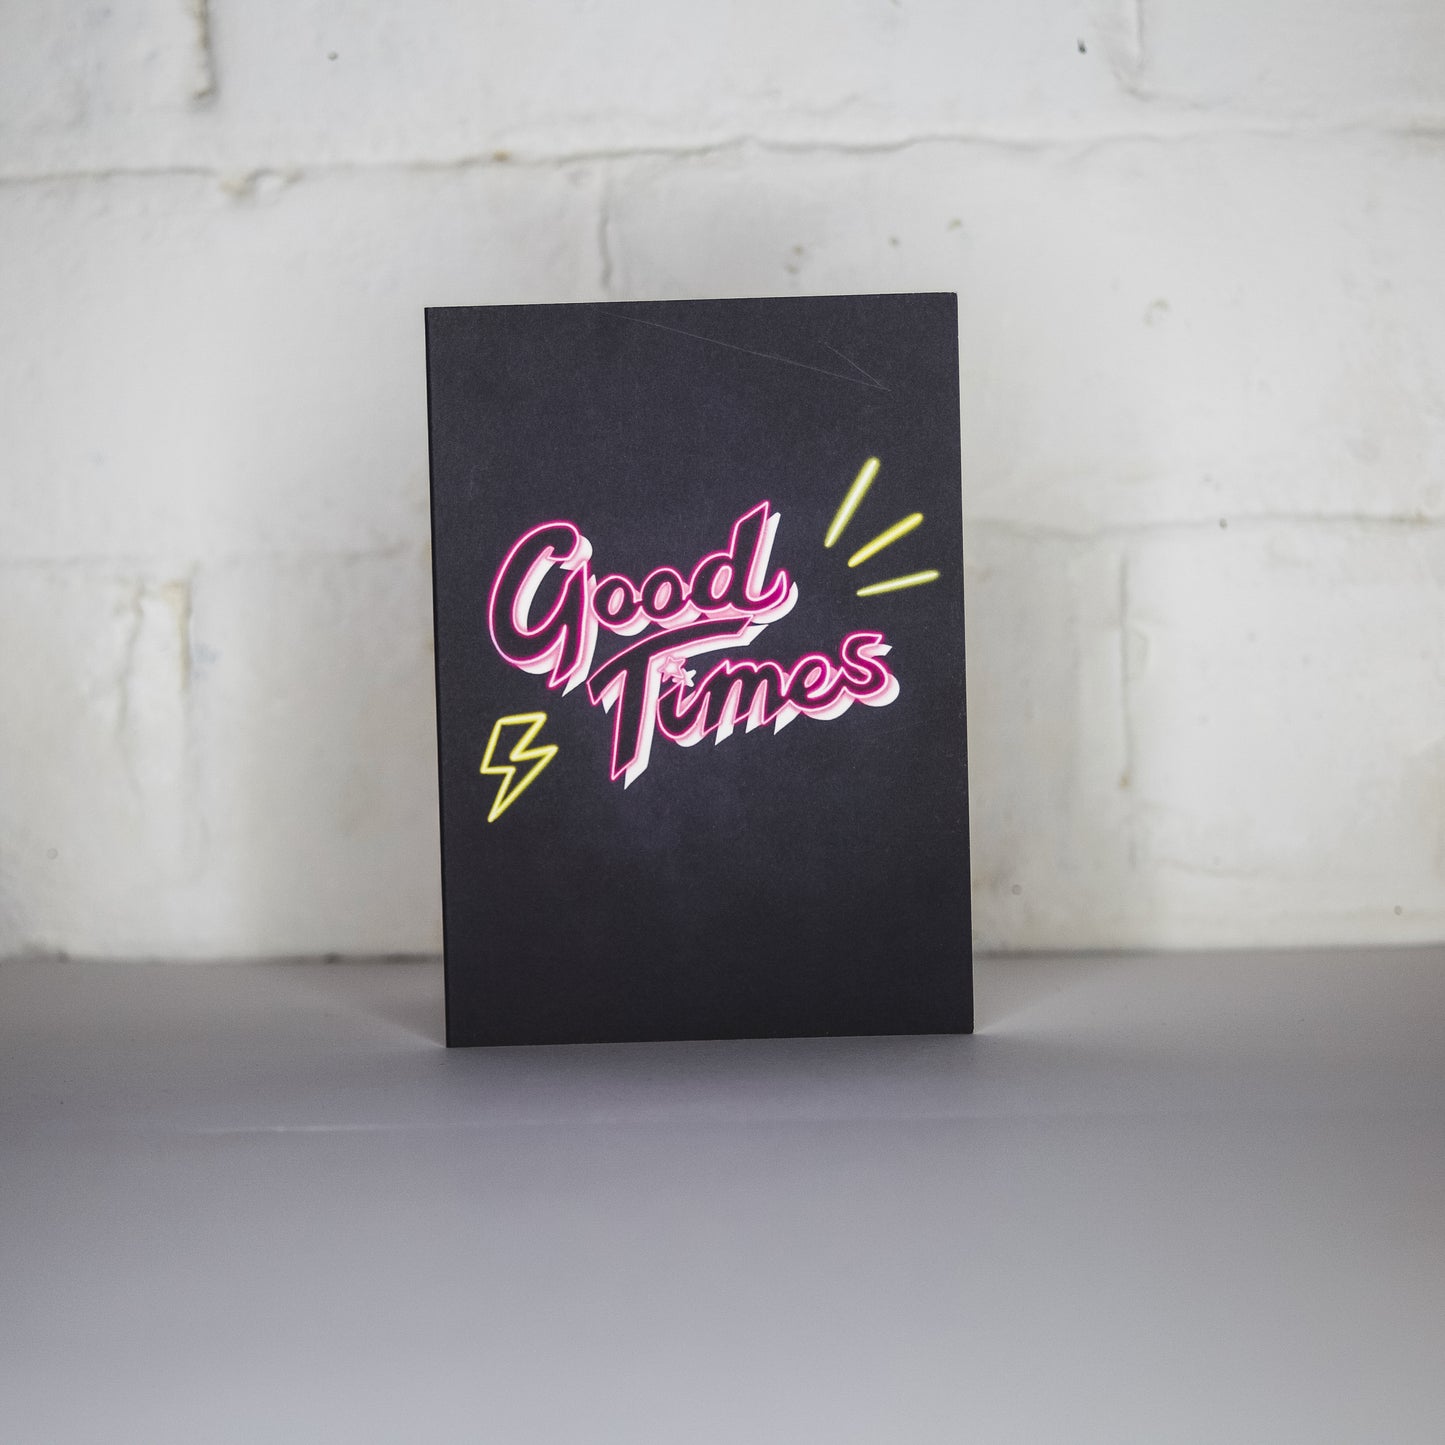 Greetings card with black background and pink Good Times neon writing by Wayward